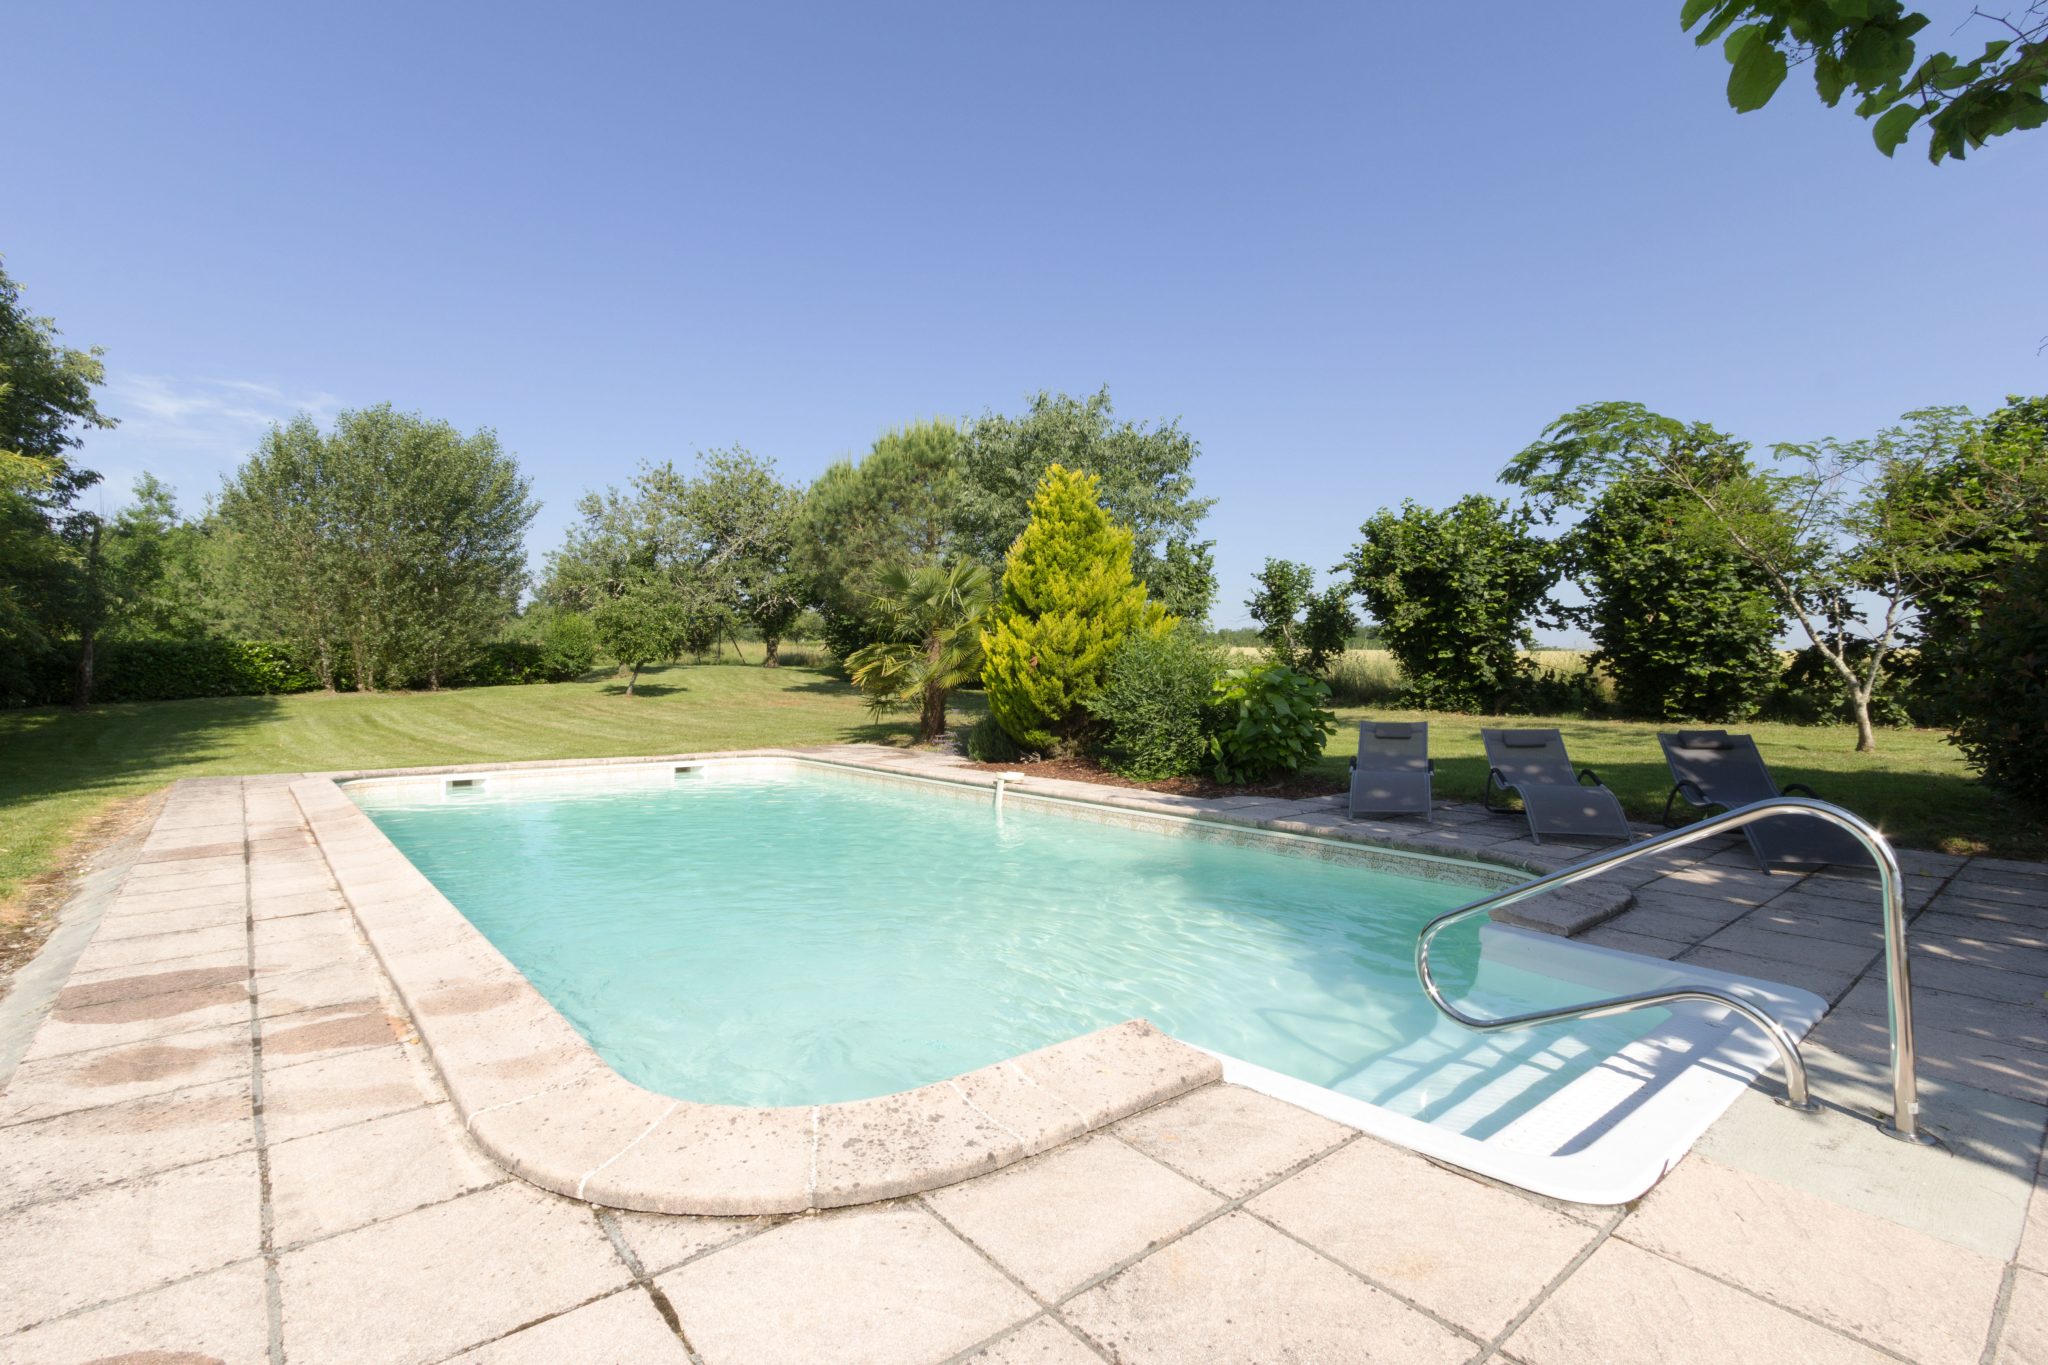 Private heated 10m x 5m swimming pool